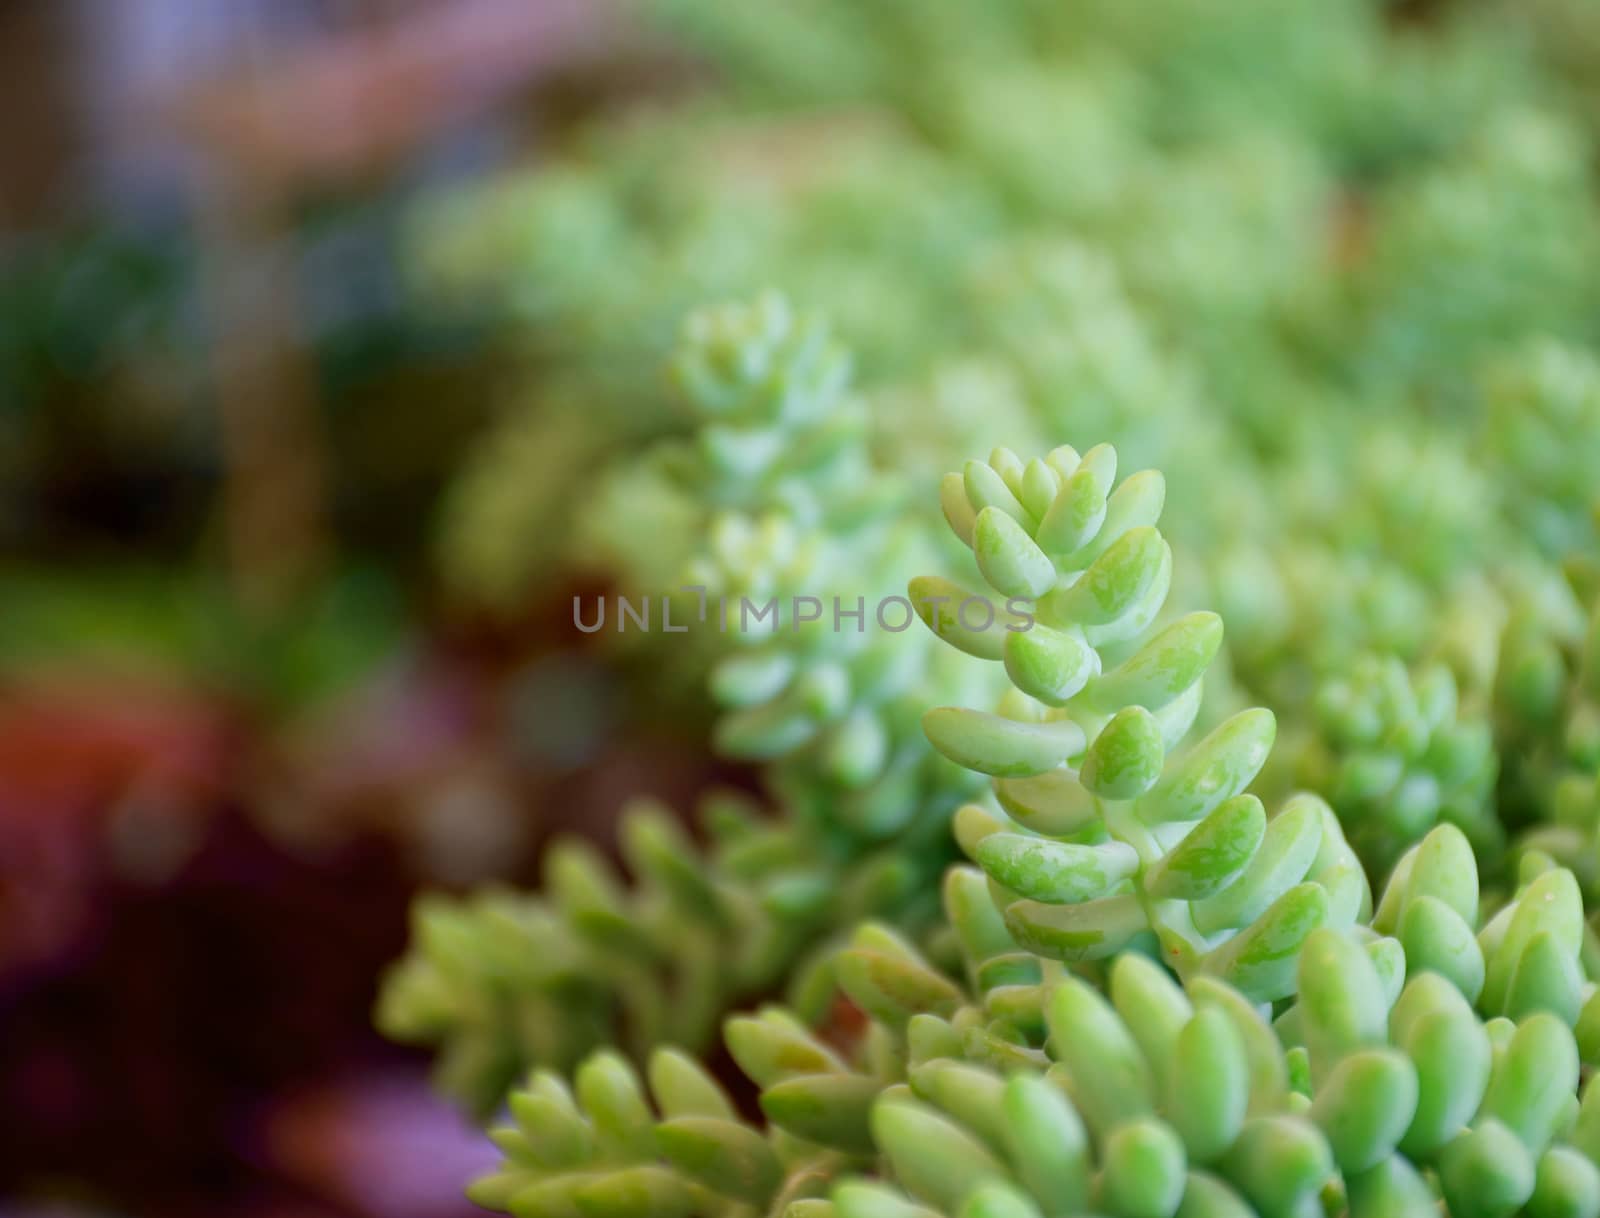 Soft focus to line with group of Succulent Plants (selective focus on top of middle plant)